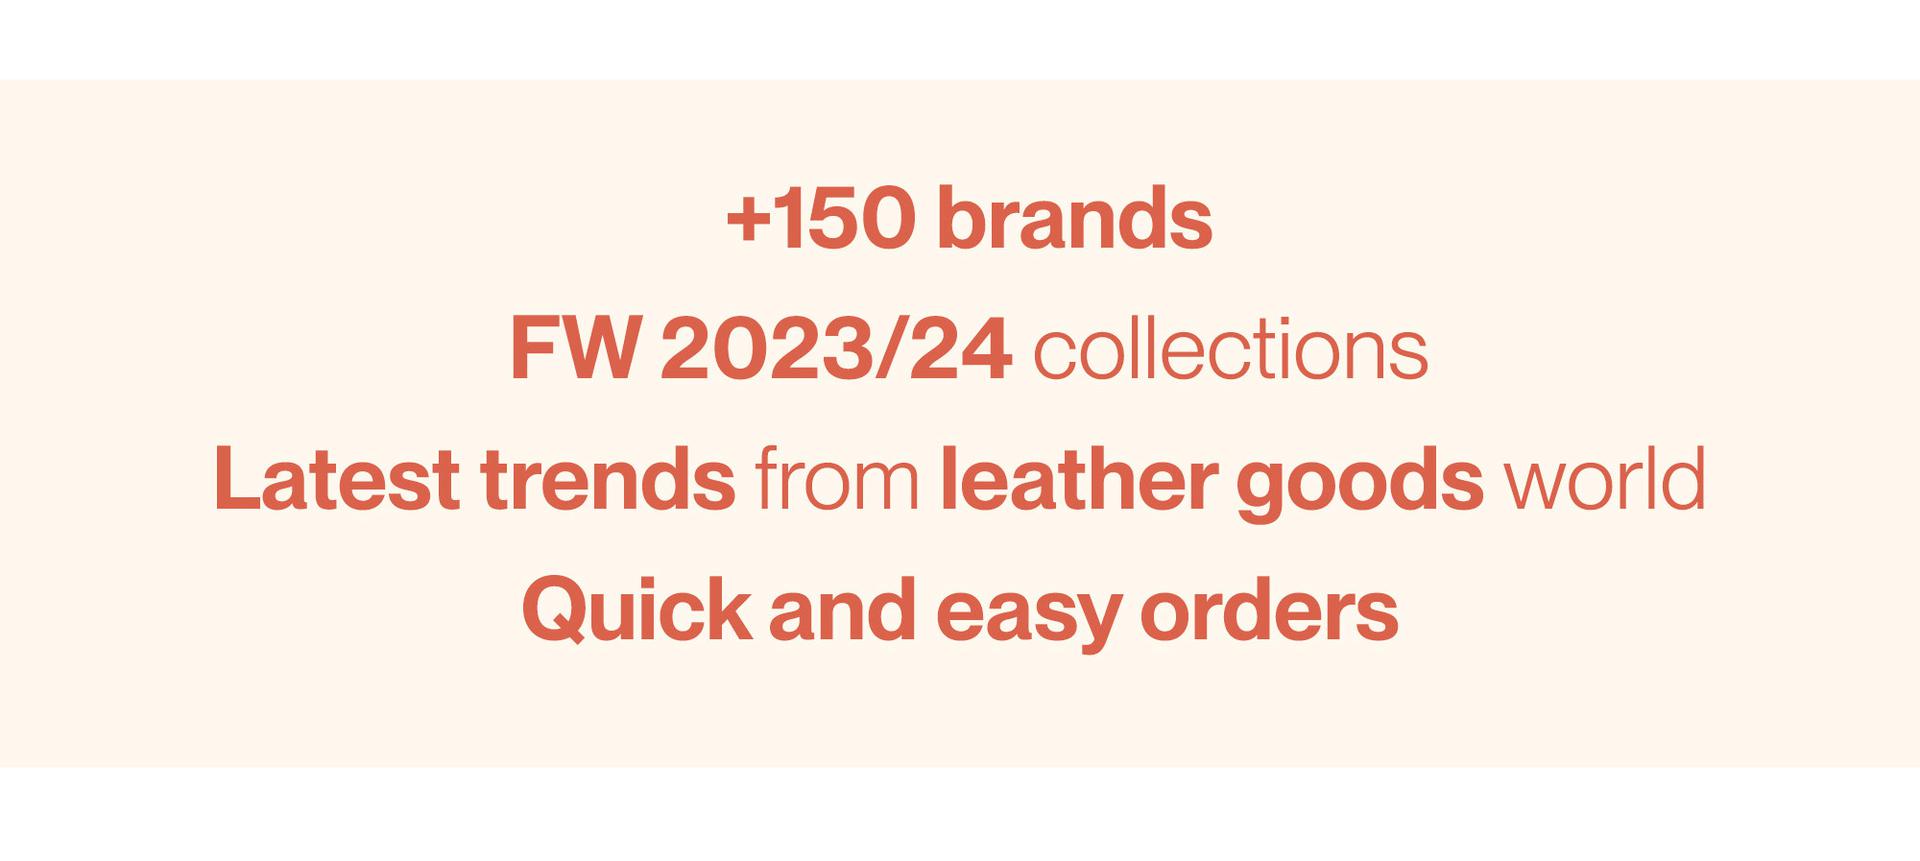 +150 BRANDS - FW 2023/24 COLLECTIONS LATEST - TRENDS FROM LEATHER GOODS WORLD - QUICK AND EASY ORDERS